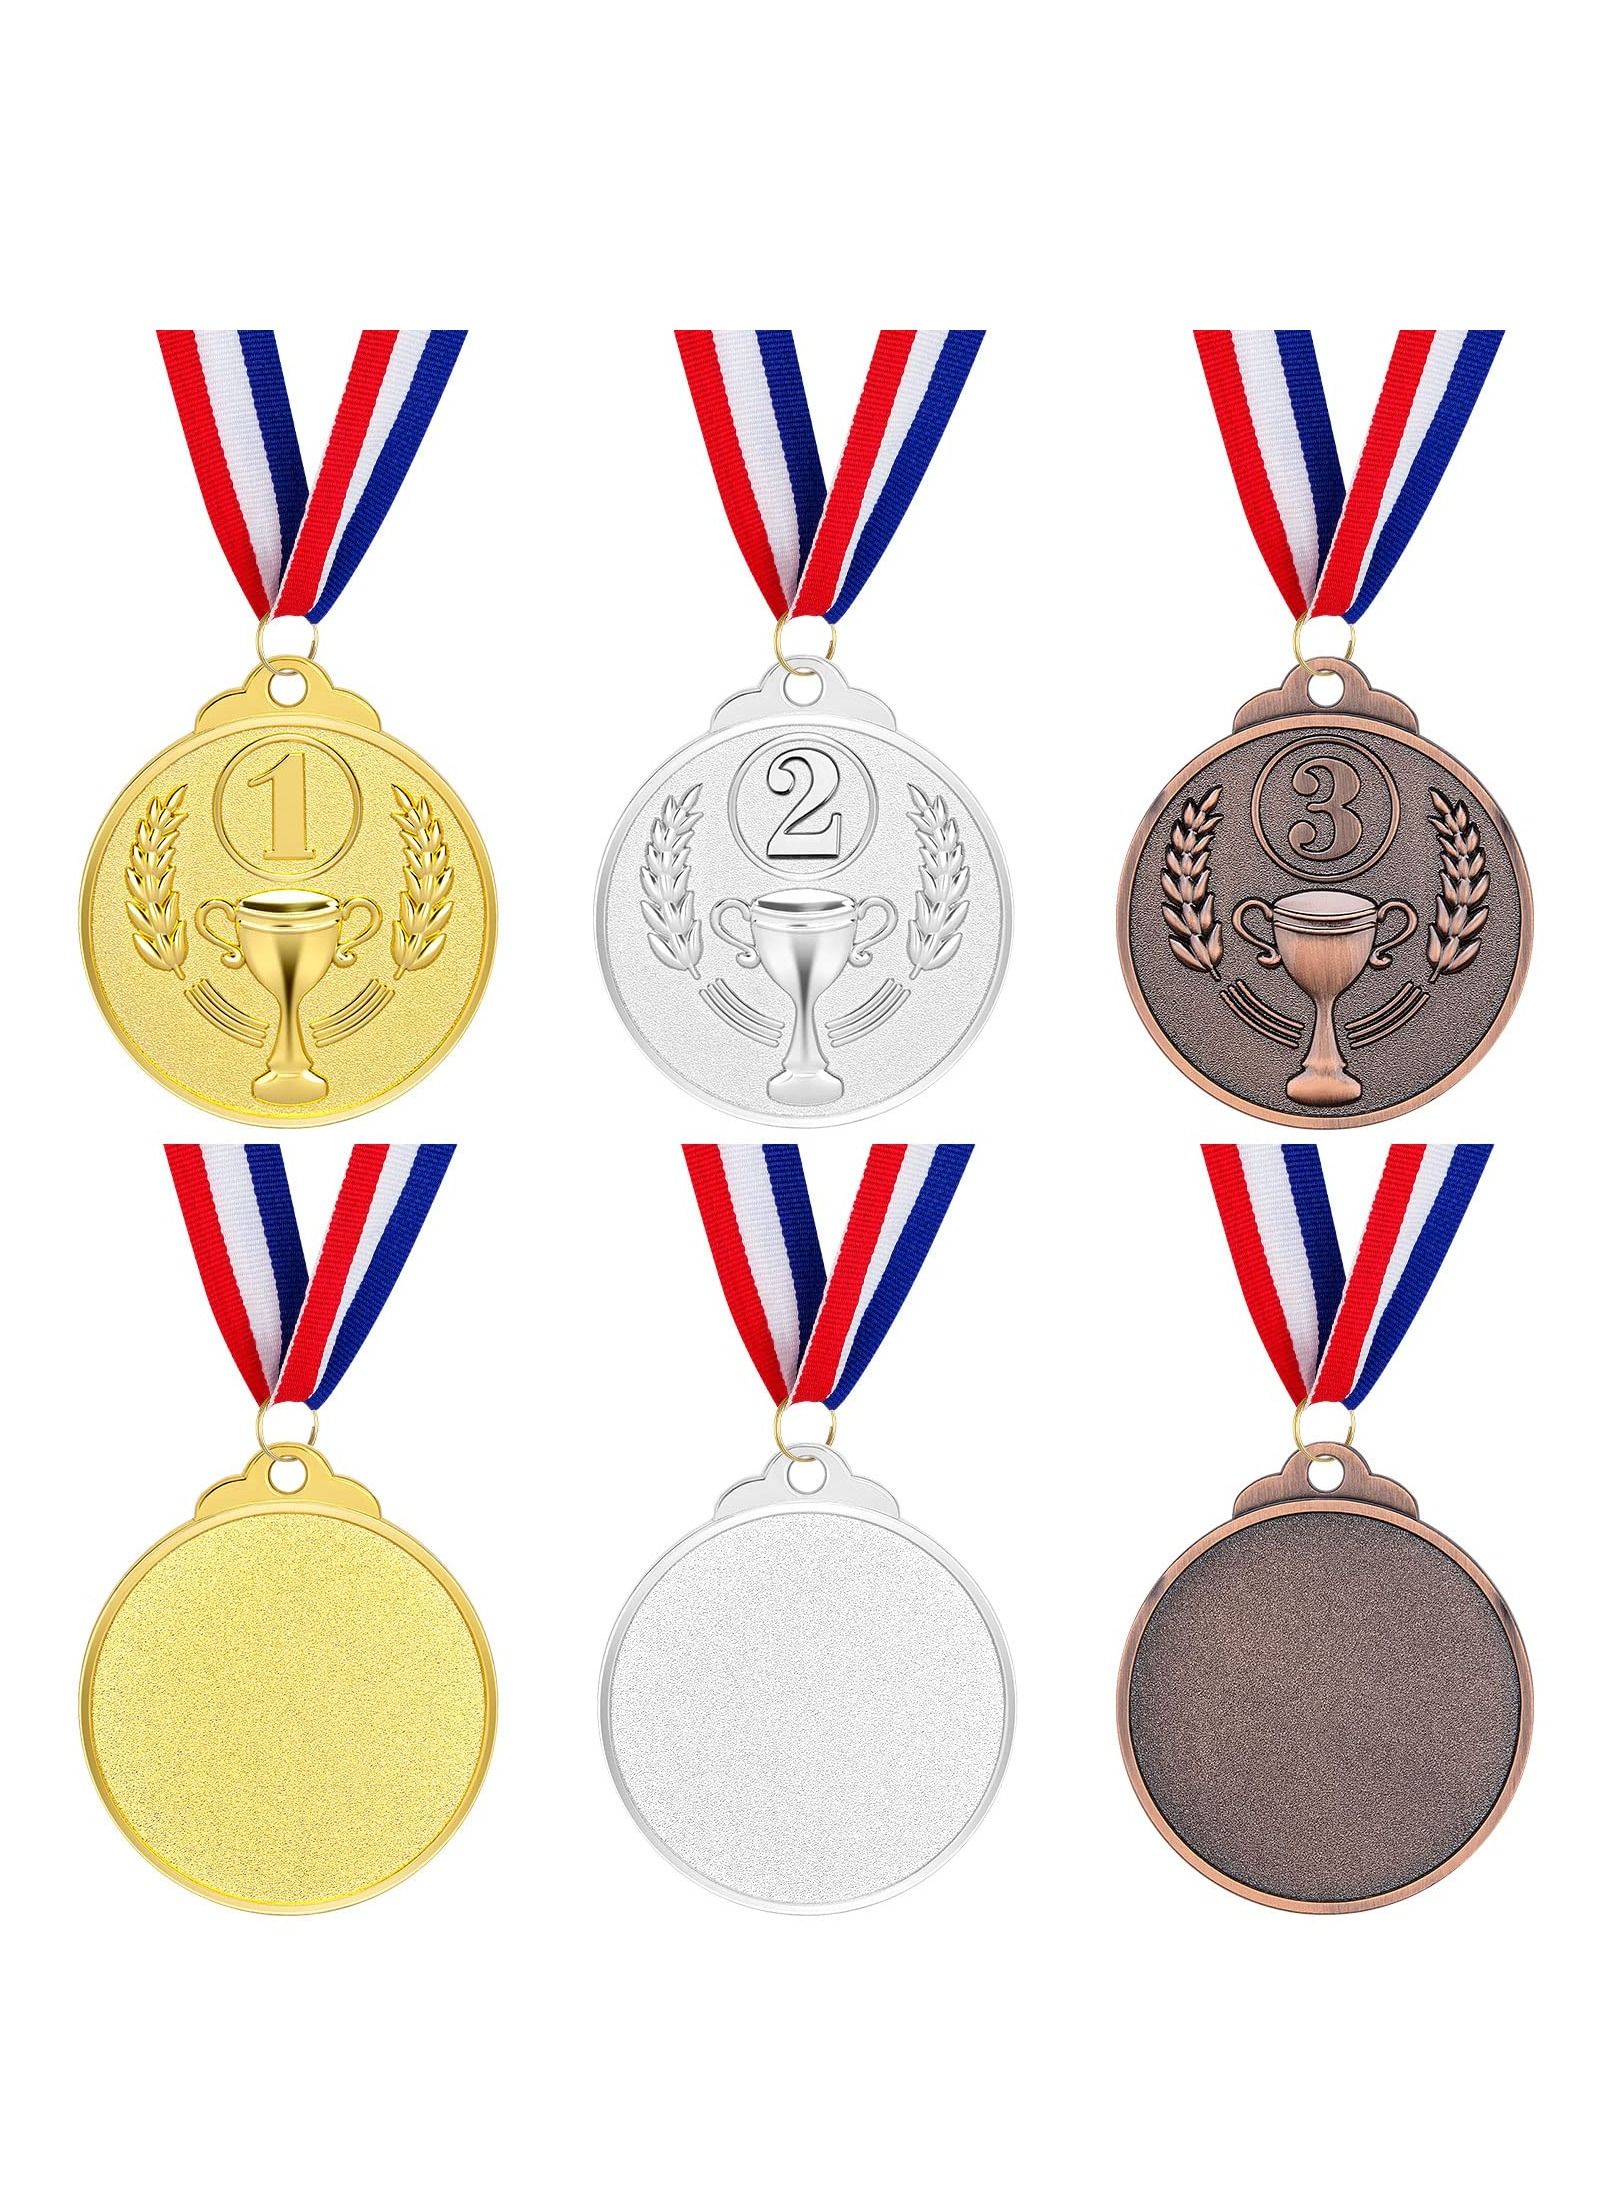 Award Metal Kids Winner Medals for Kids, Gold Silver and Bronze Medals with Trophy Pattern 1st 2nd 3rd Prizes for Sports Award, Competitions, Party Favors and Decorations(12 Pcs) 